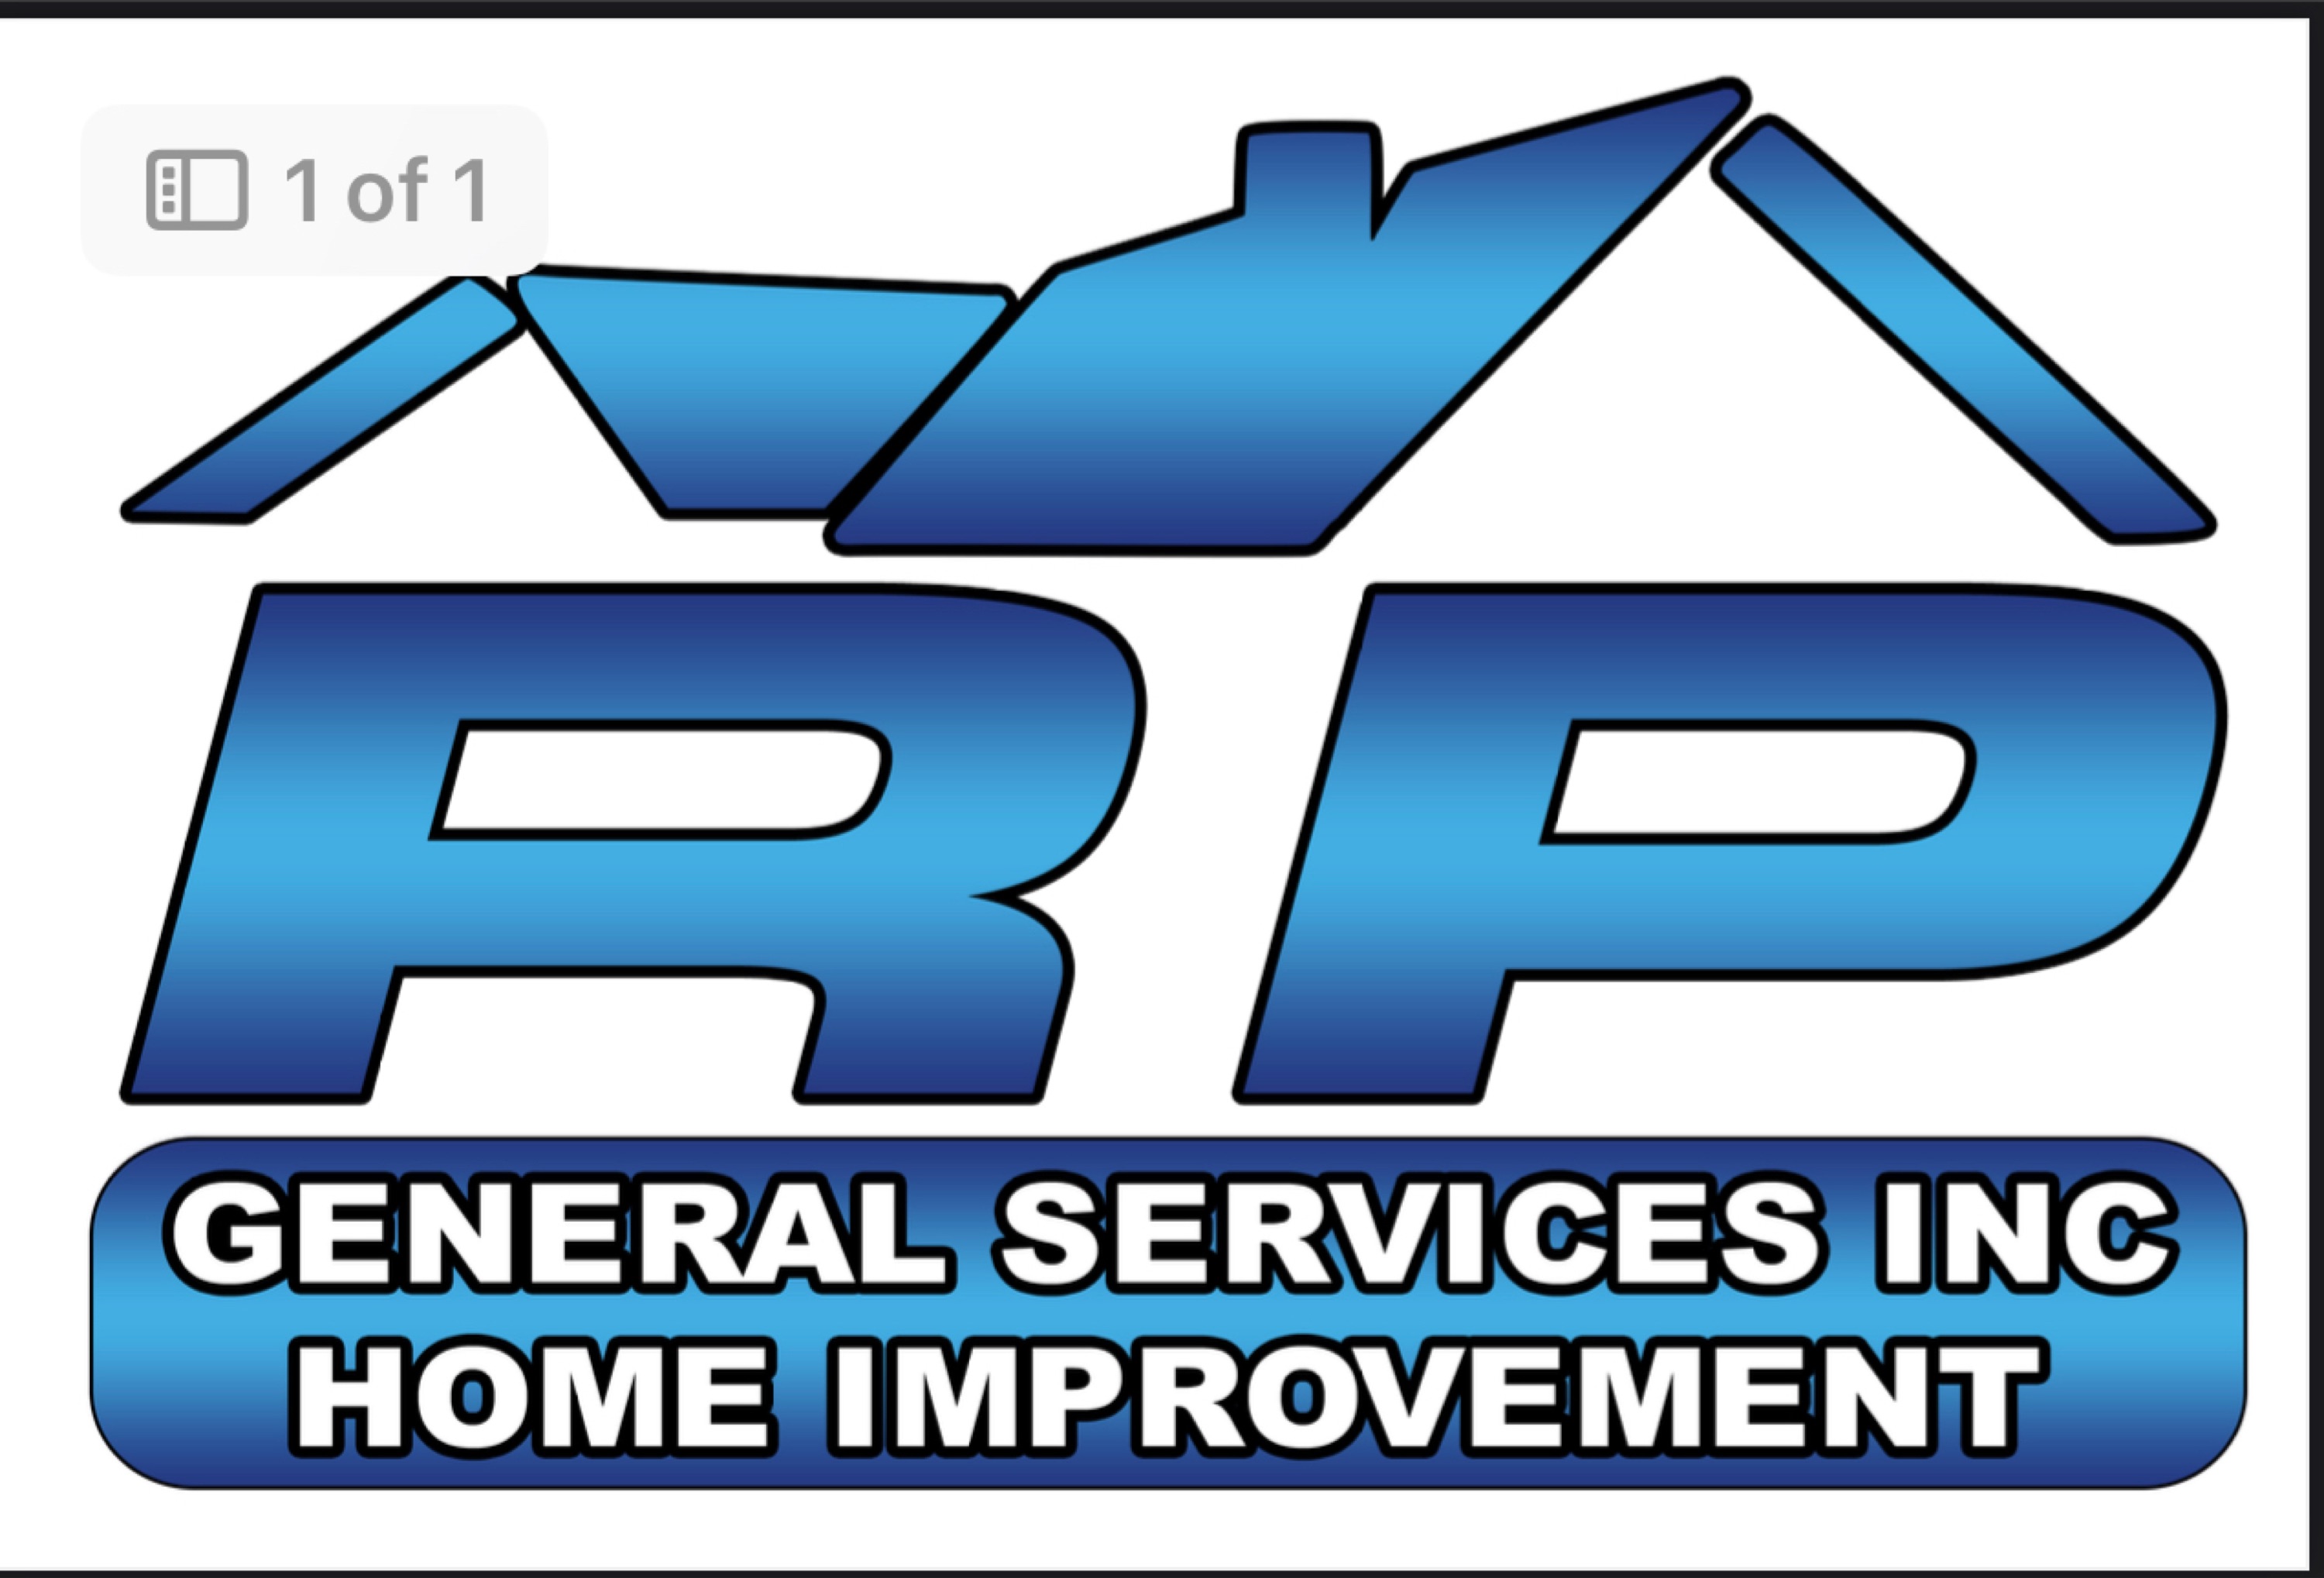 RP General Services Logo